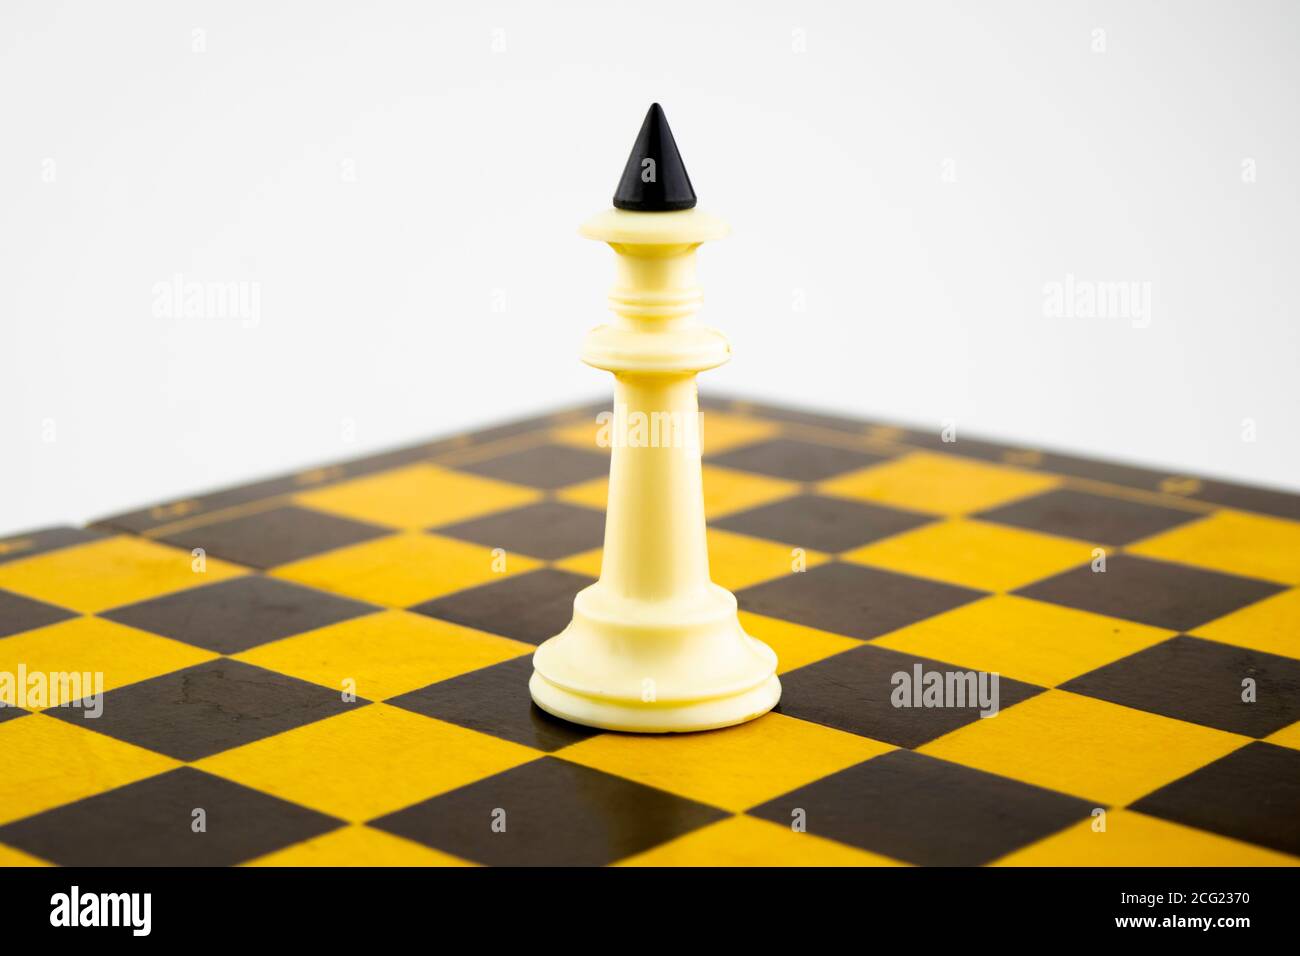 Premium AI Image  A yellow background accentuates the presence of chess  pieces and the board Vertical Mobile Wallpaper